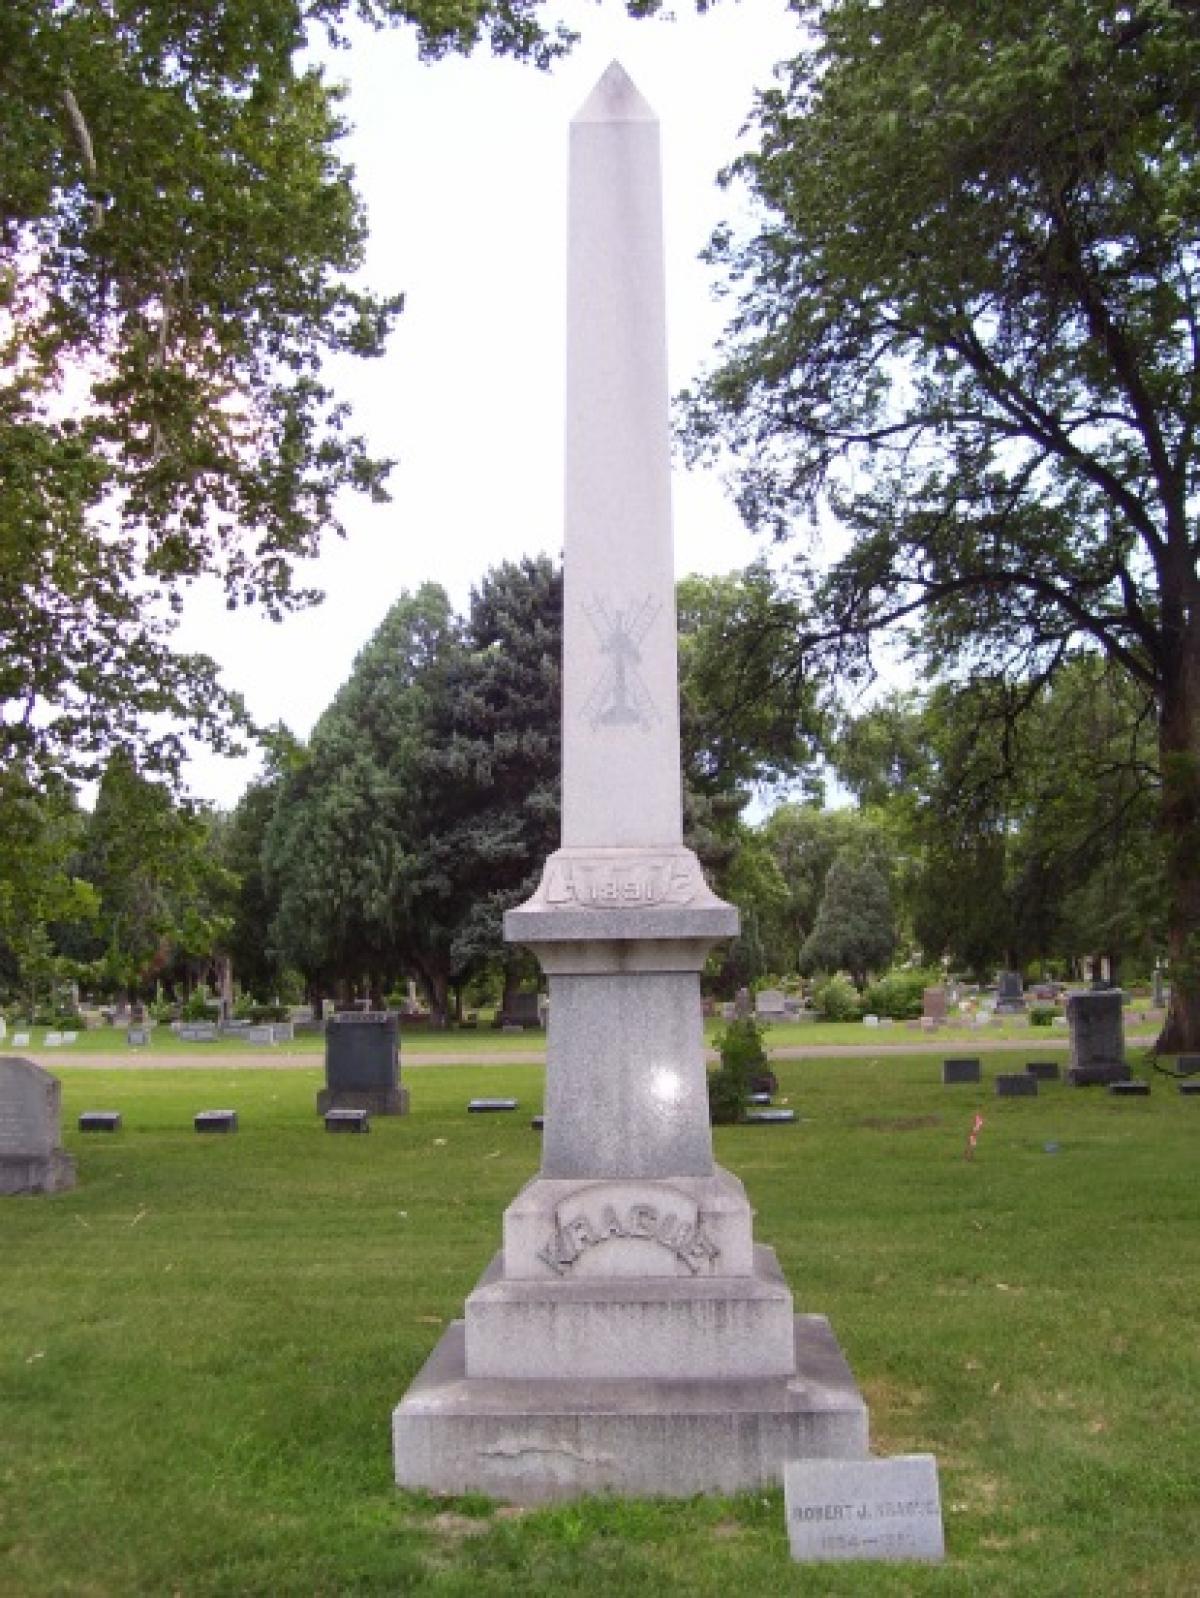 OK, Grove, Headstone Symbols and Meanings, Obelisk